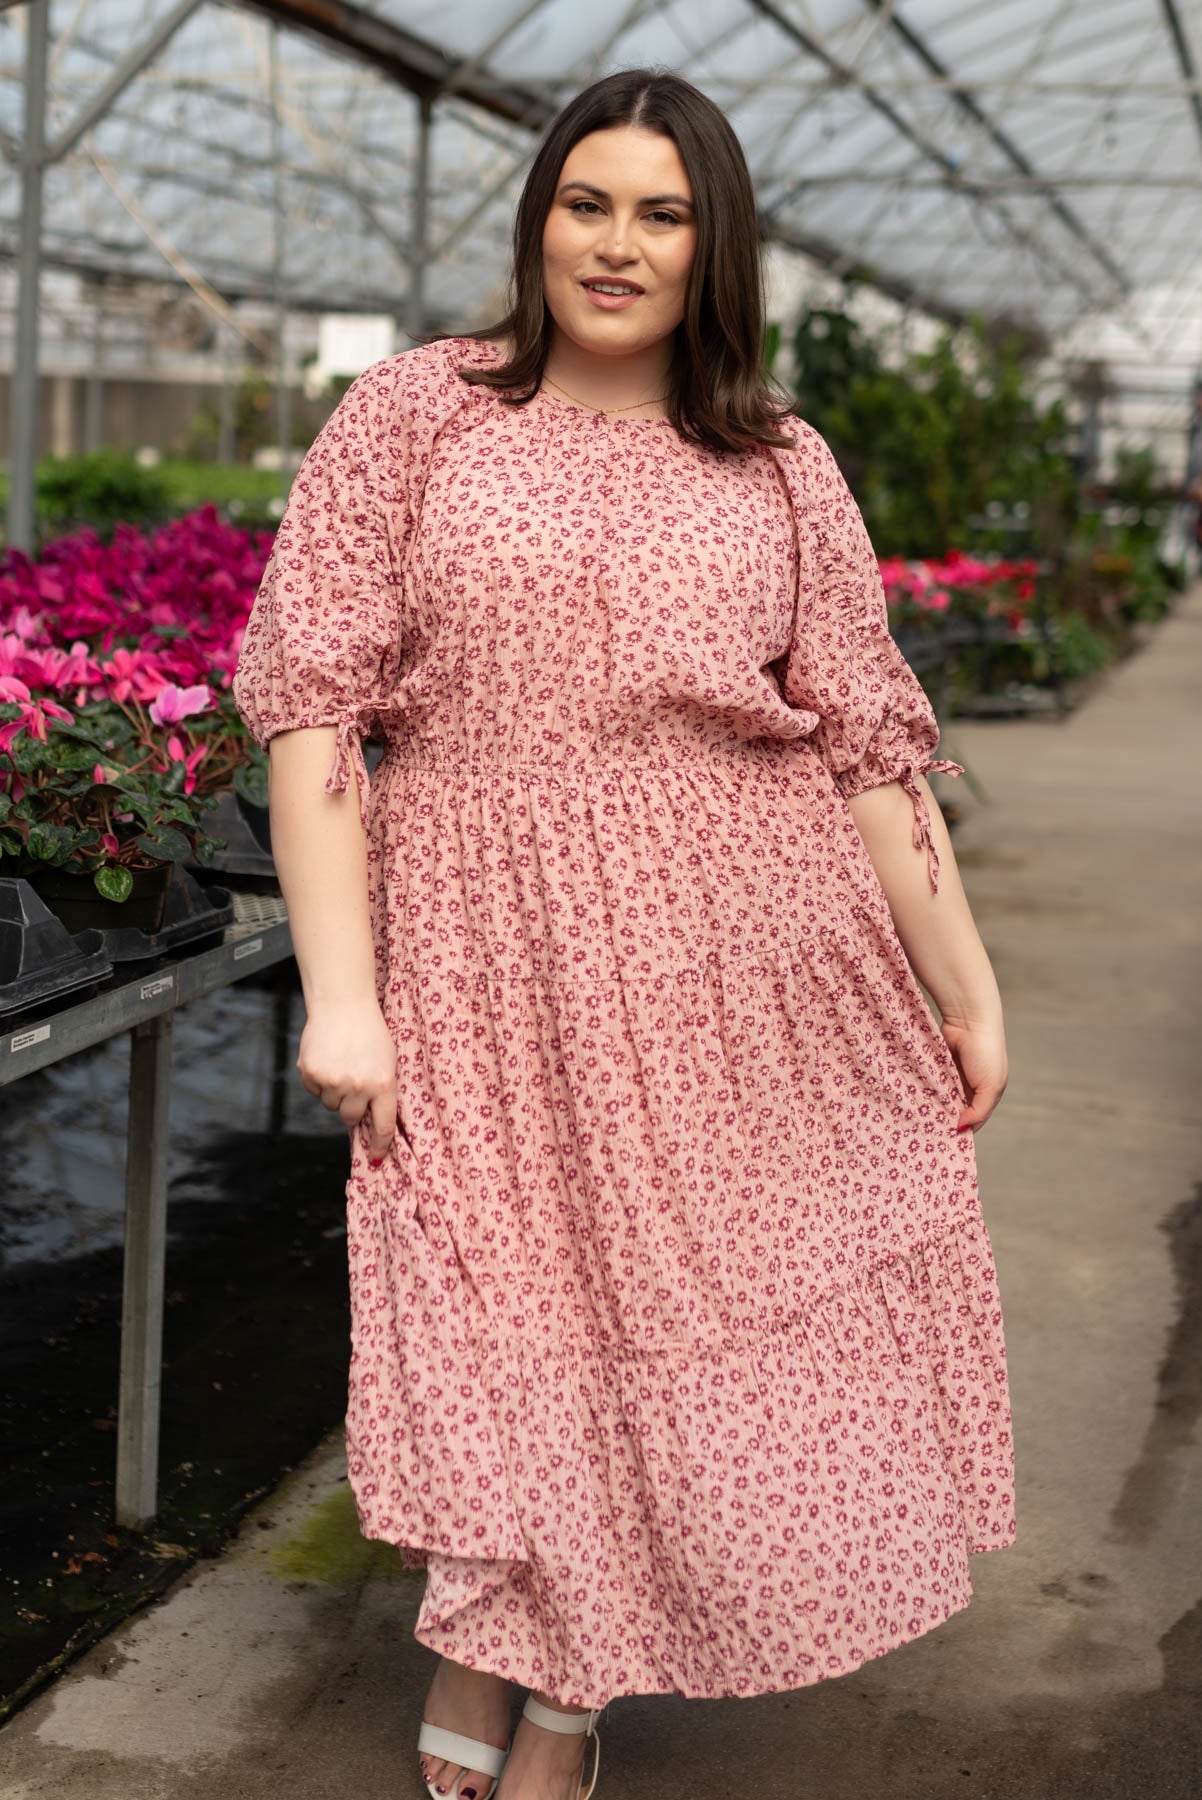 Plus size blush tiered dress that ties at the cuff